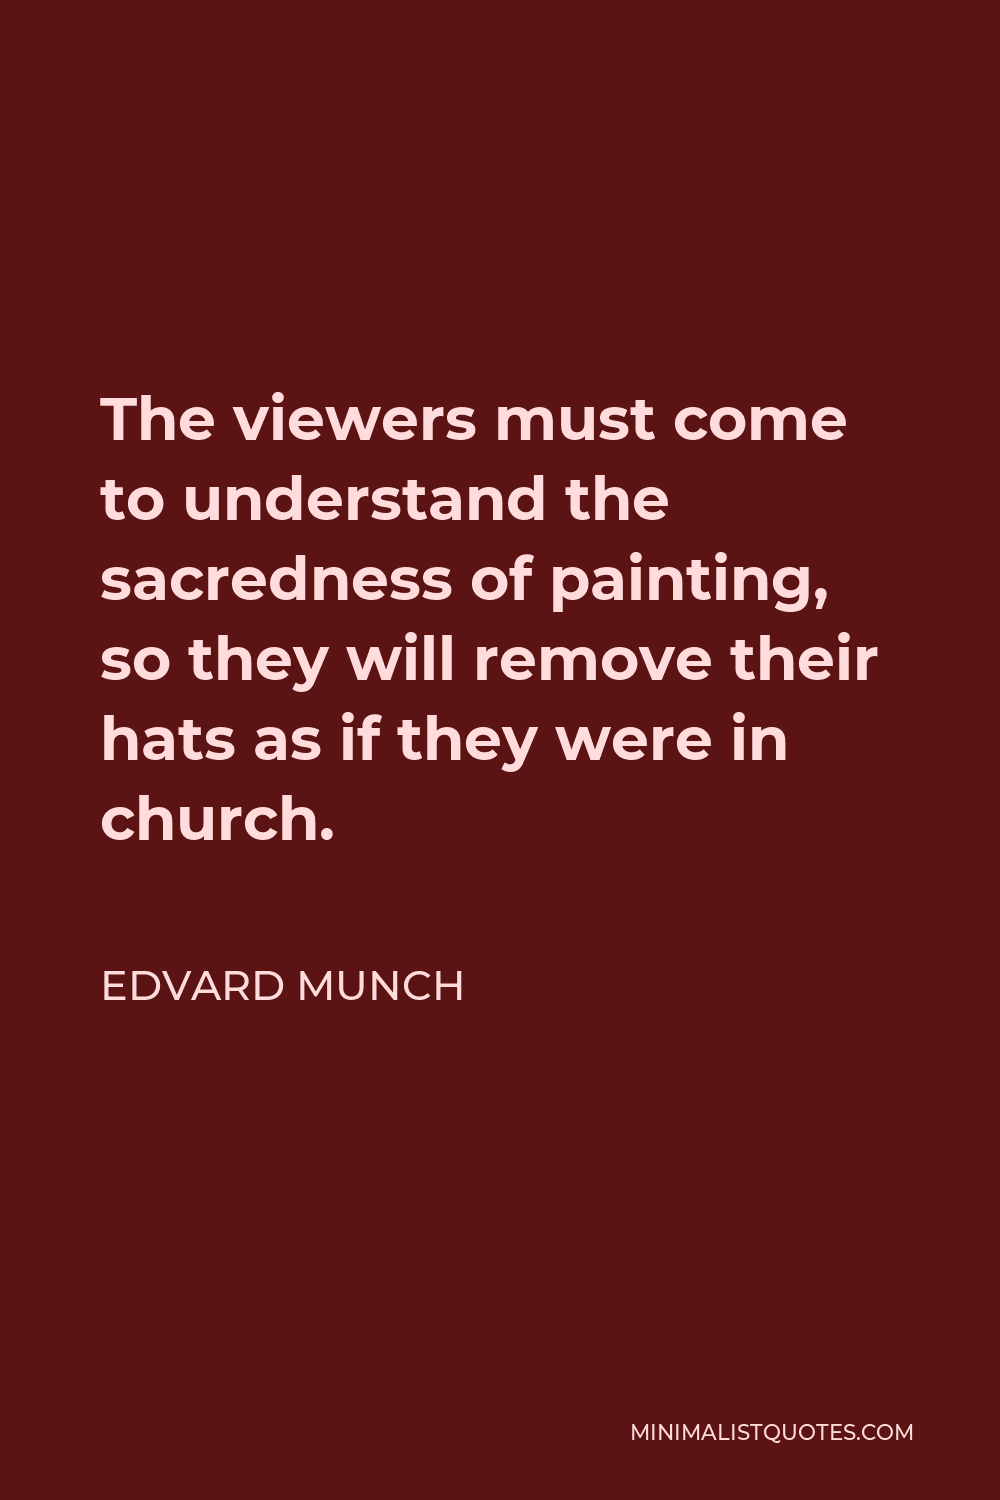 Edvard Munch Quote - The viewers must come to understand the sacredness of painting, so they will remove their hats as if they were in church.